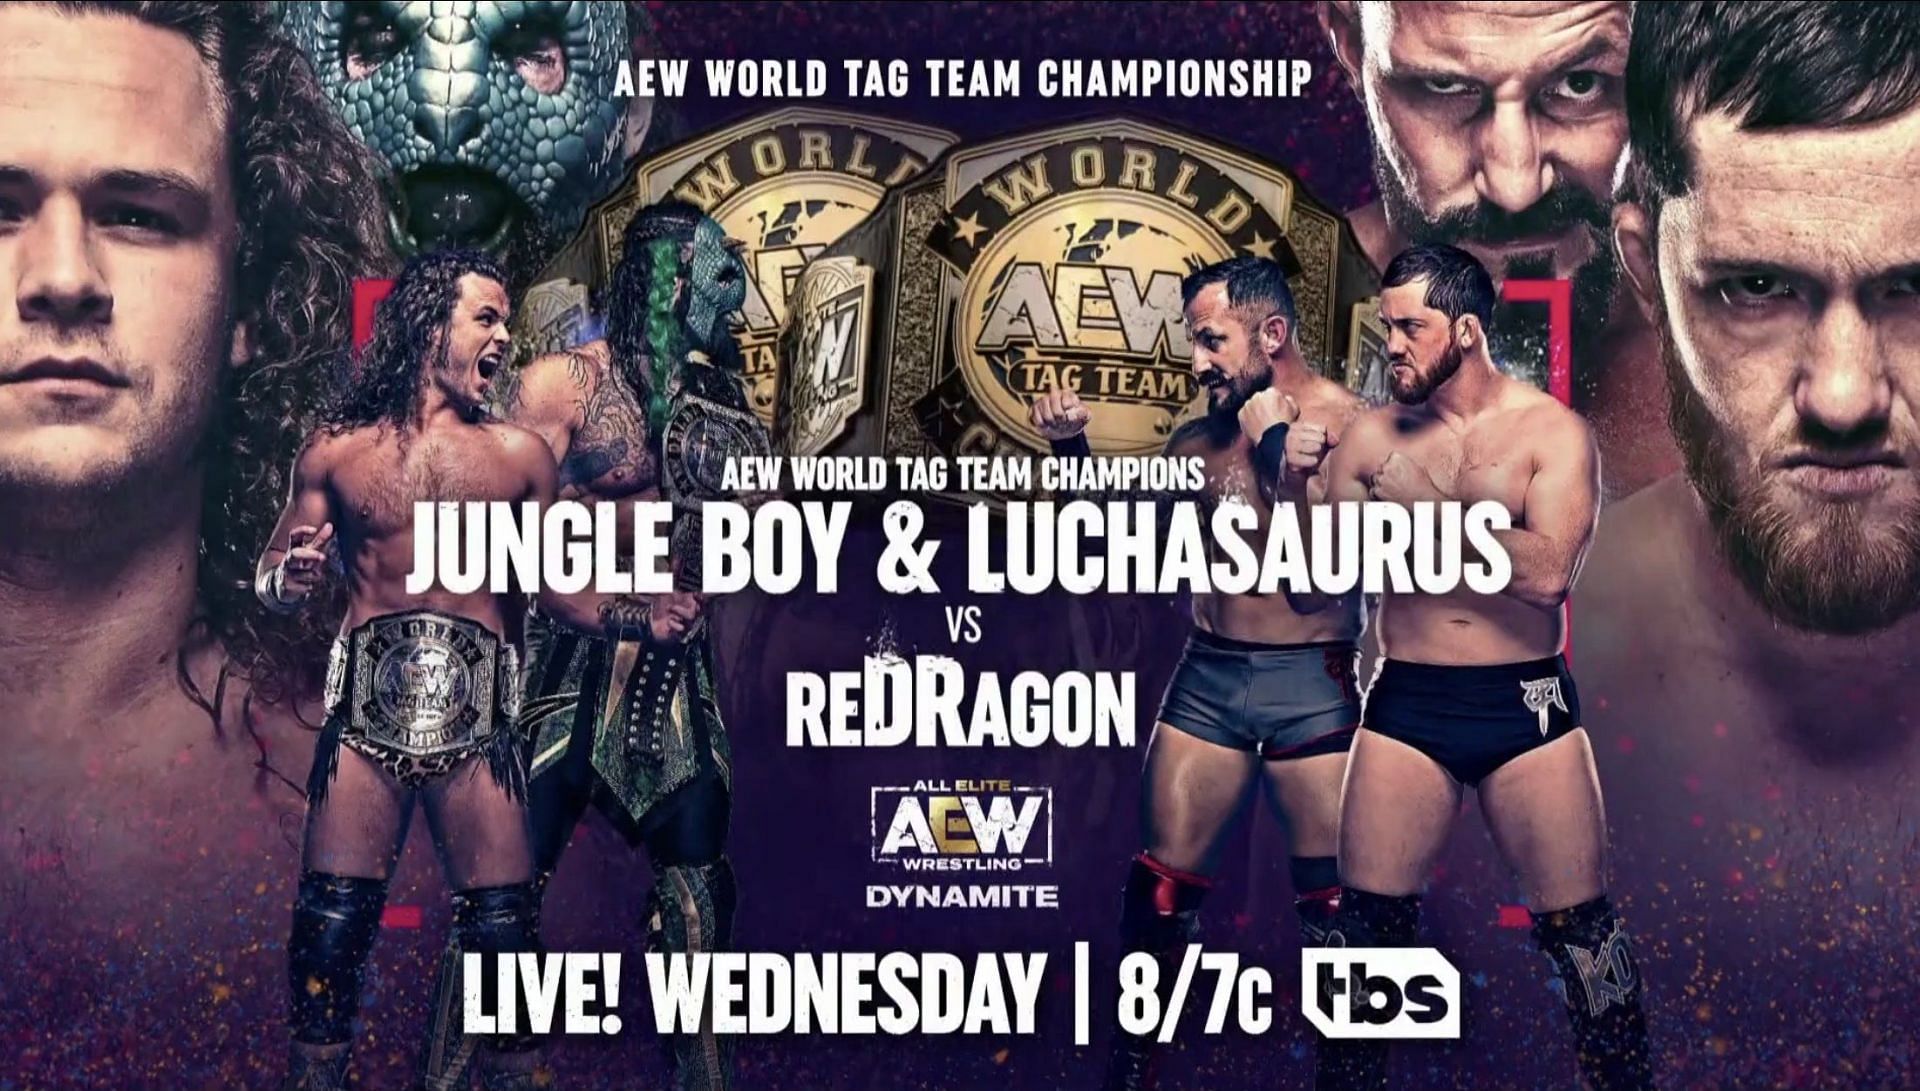 The AEW Tag Team Championship will be on the line next week